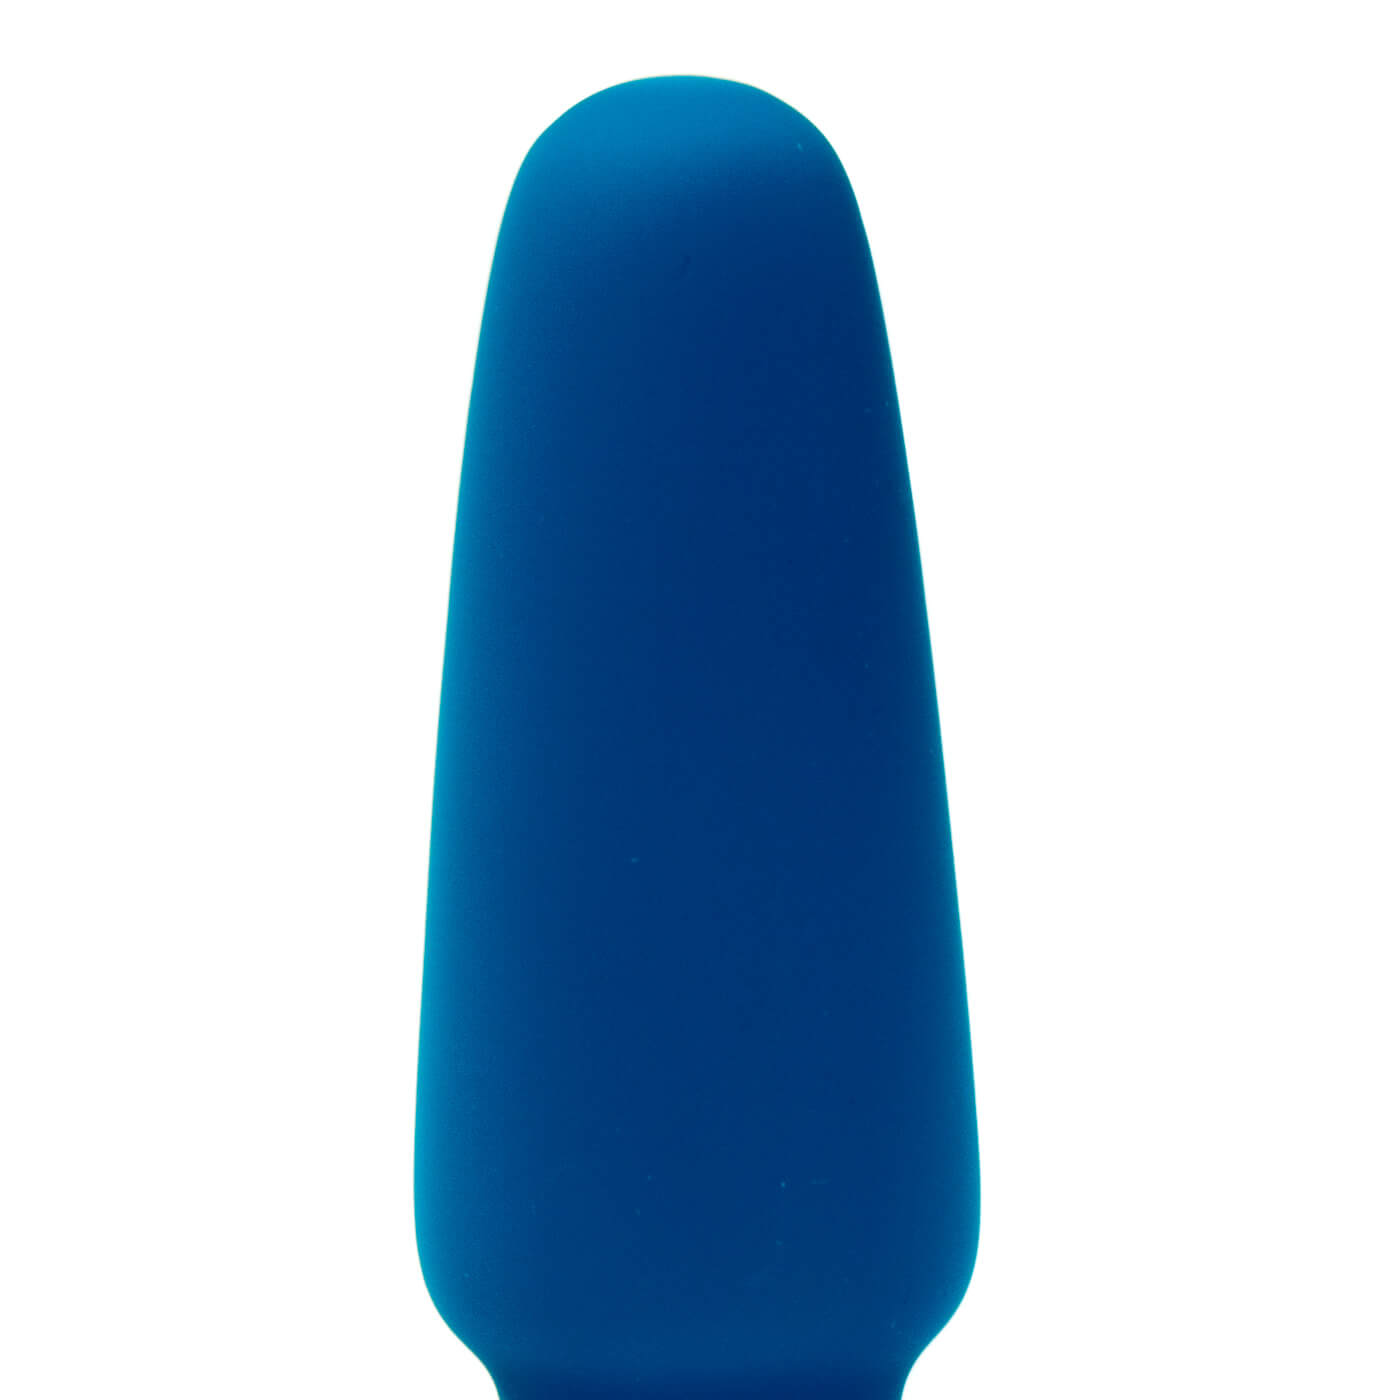 b-Vibe Rimming Remote Control 13 Function USB Rechargeable Vibrating Butt Plug